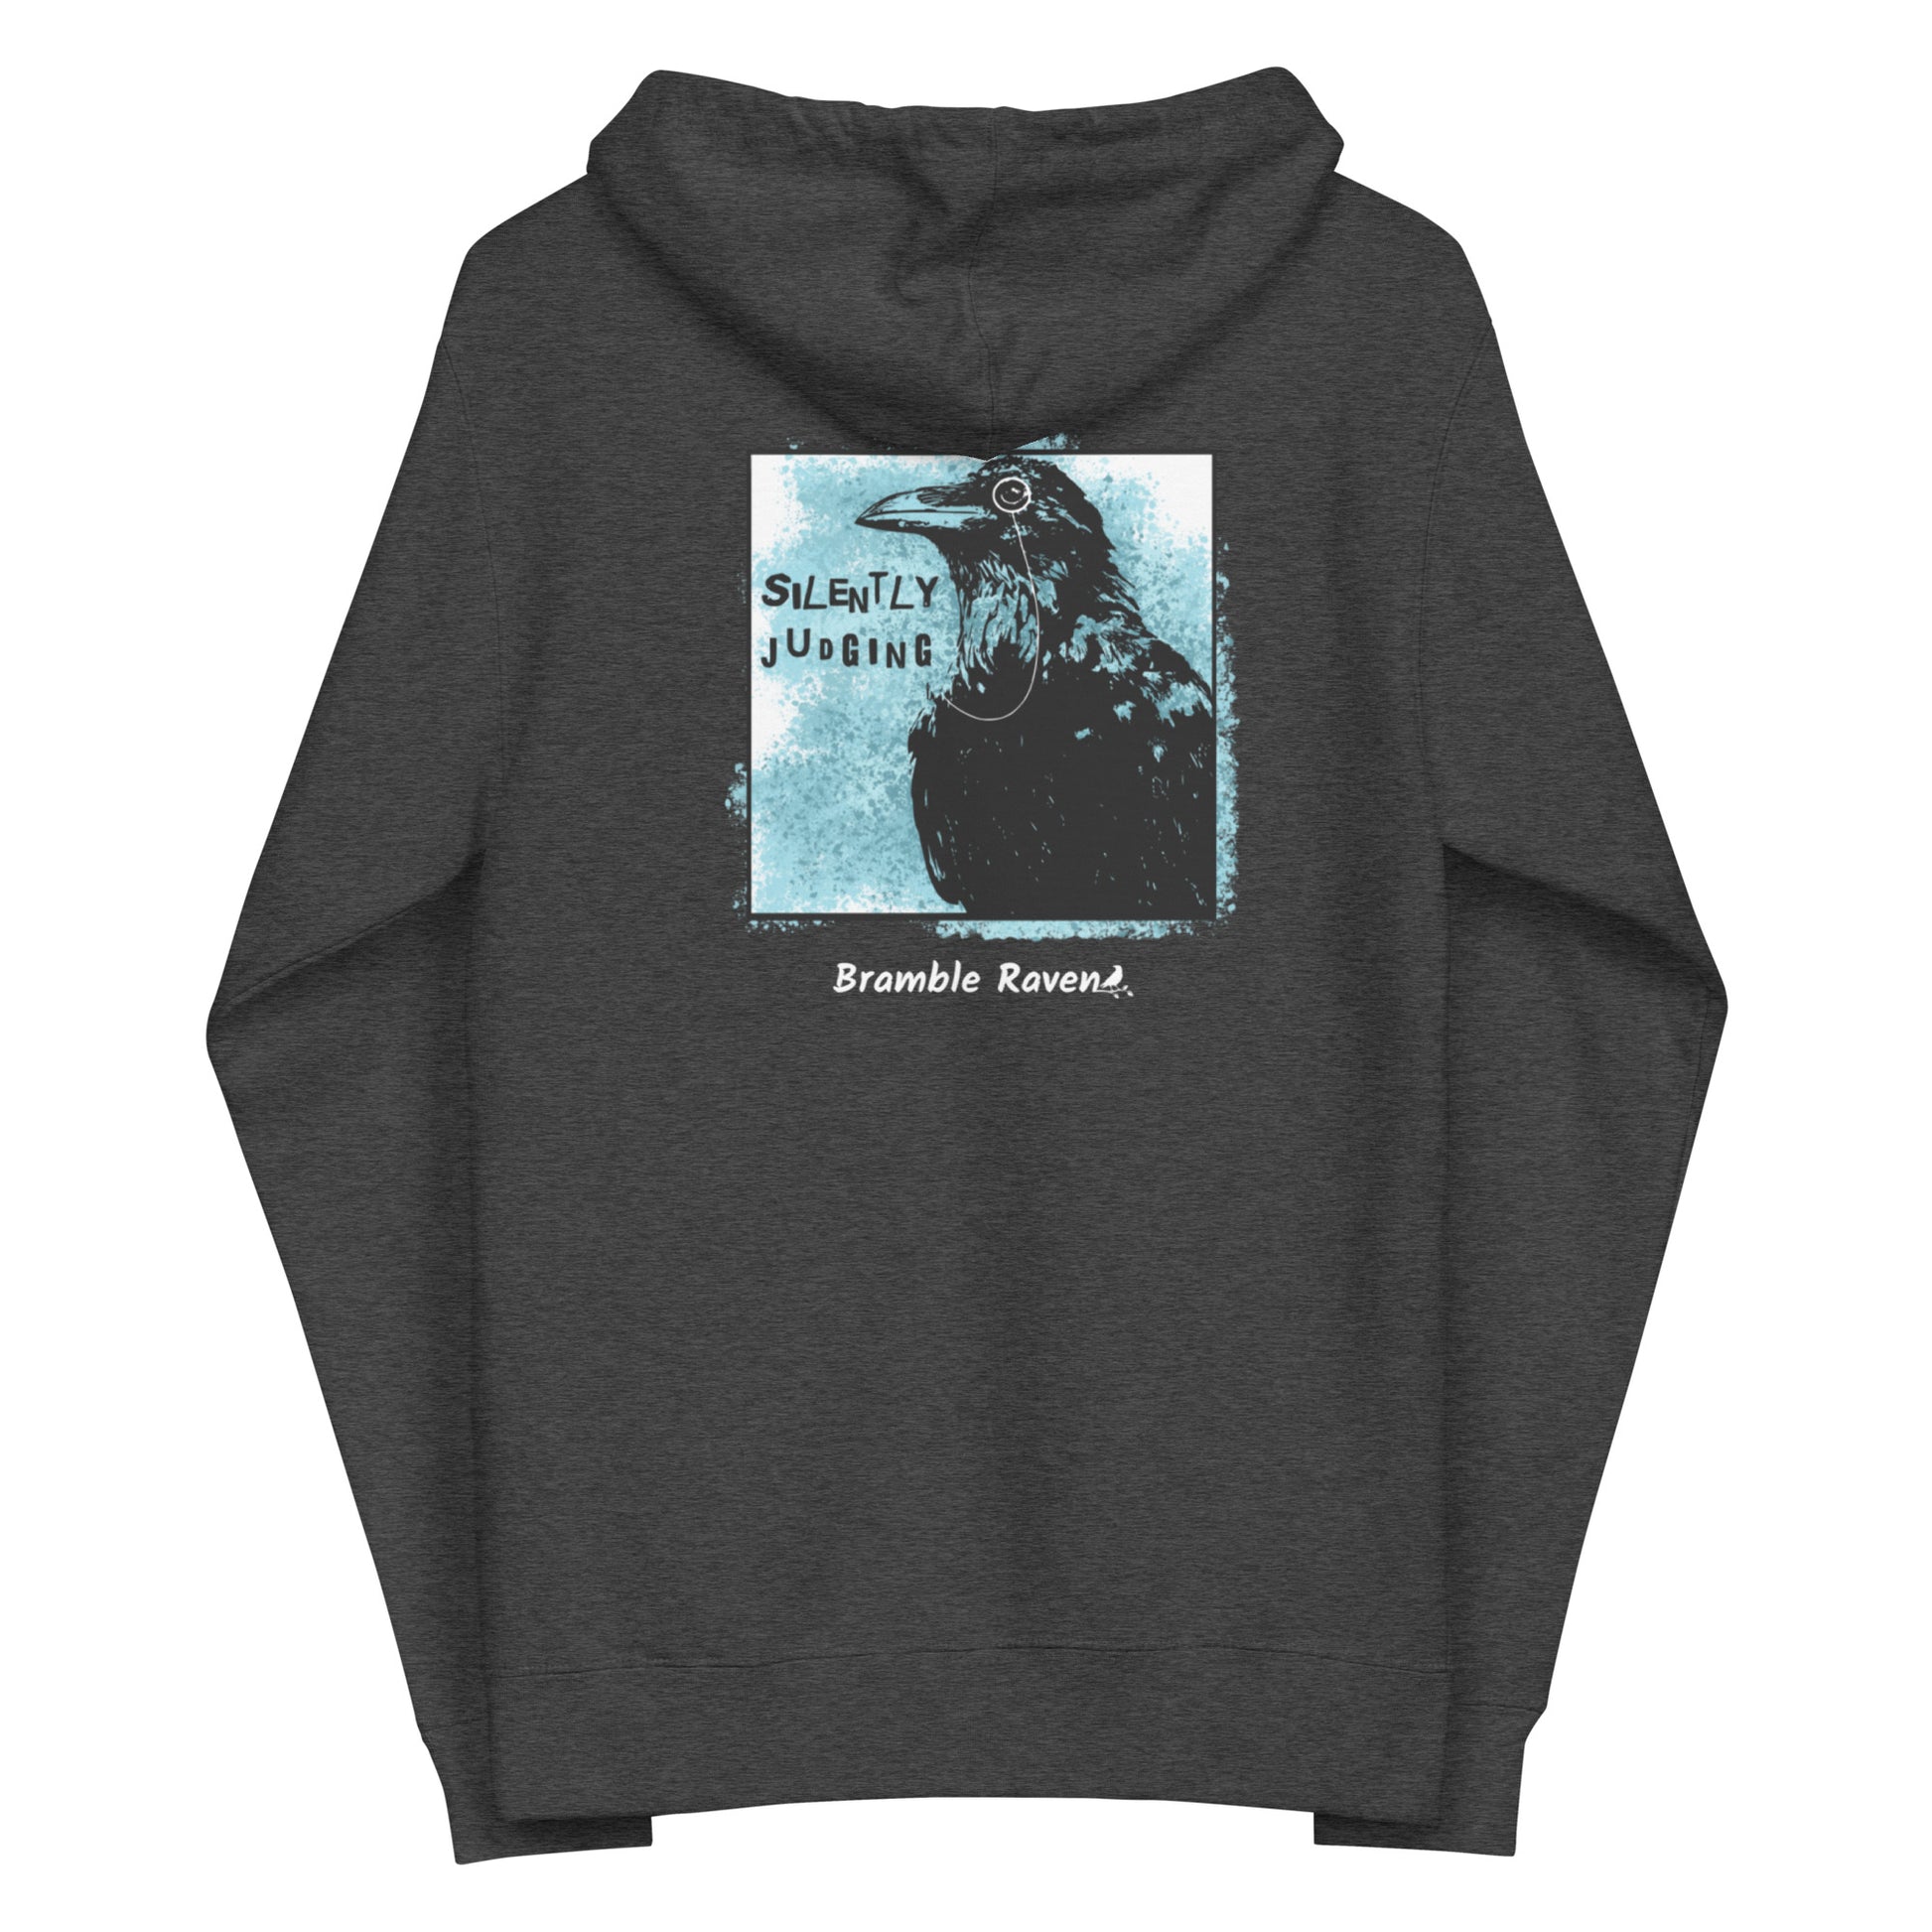 Unisex fleece-lined charcoal heather grey colored zip-up hoodie with silently judging text by black crow wearing a monocle in a square with blue paint splatters.  Design on the back of hoodie.